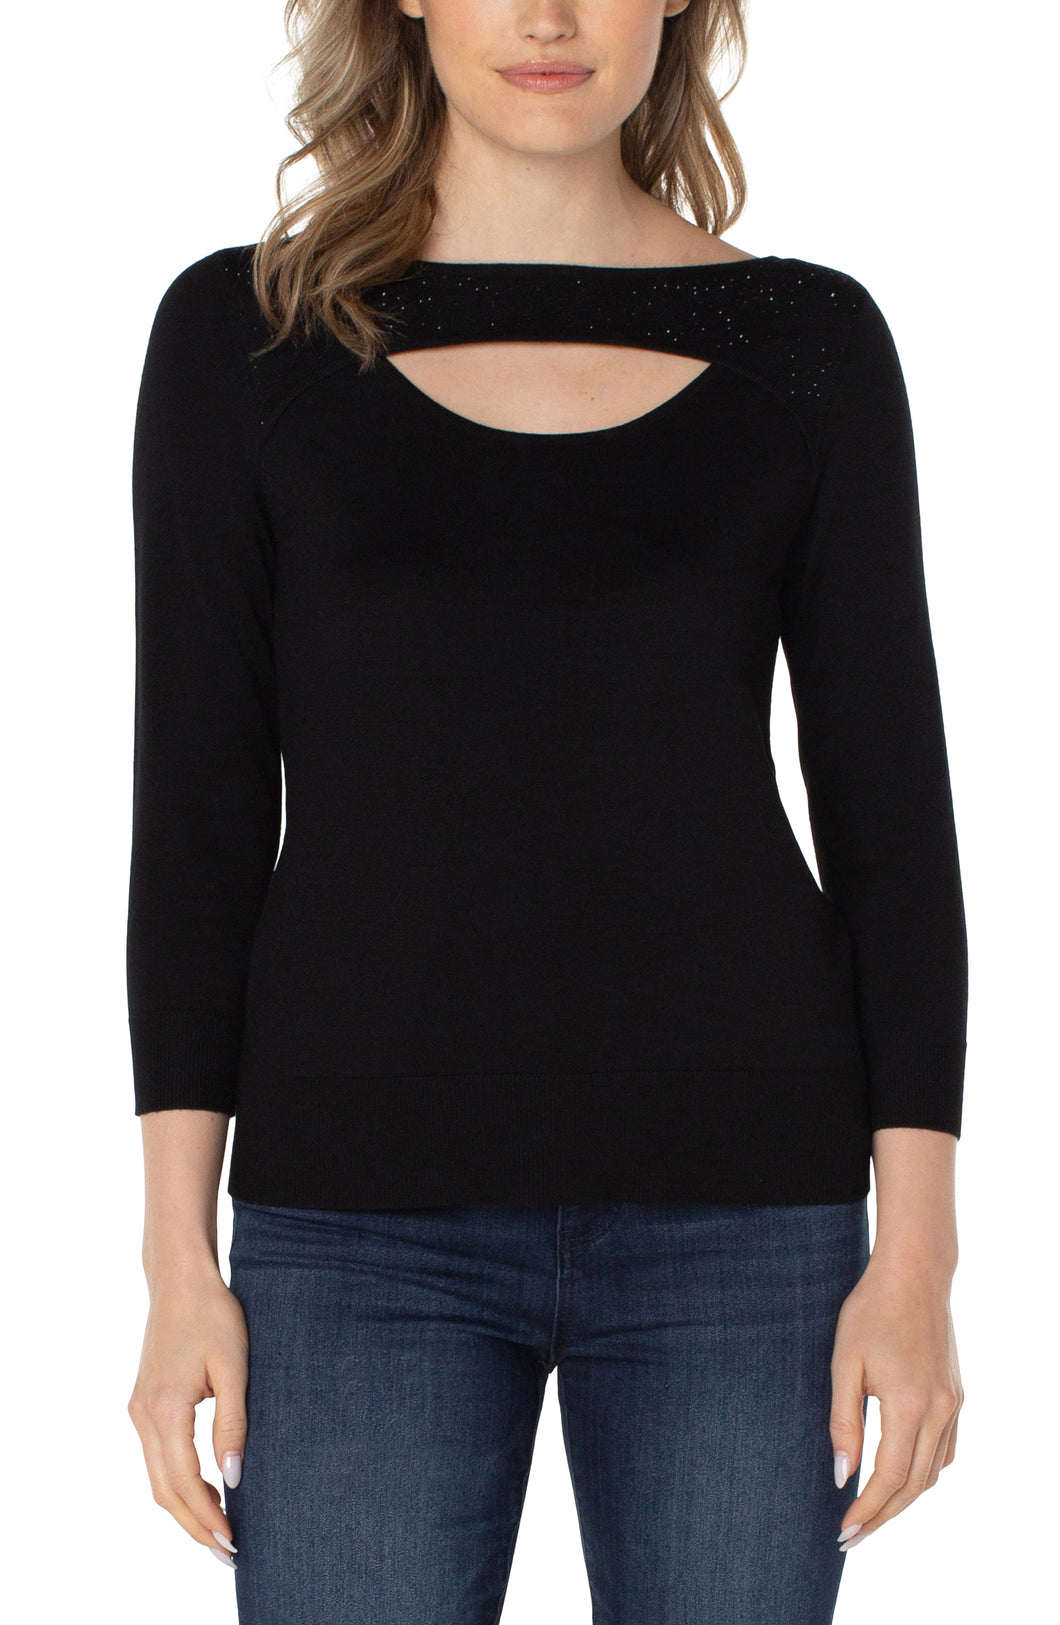 This elegant sweater features a beautiful cut out surrounded with rhinestones. Easily dress this up with one of our coatigans and vegan leather flares or dress it down with your favorite pair of denim!   Color- Black. 3/4 sleeves. Cut out detail with rhinestone details. Ribbed hem. Fabric-78% Rayon. 22% Polyester.